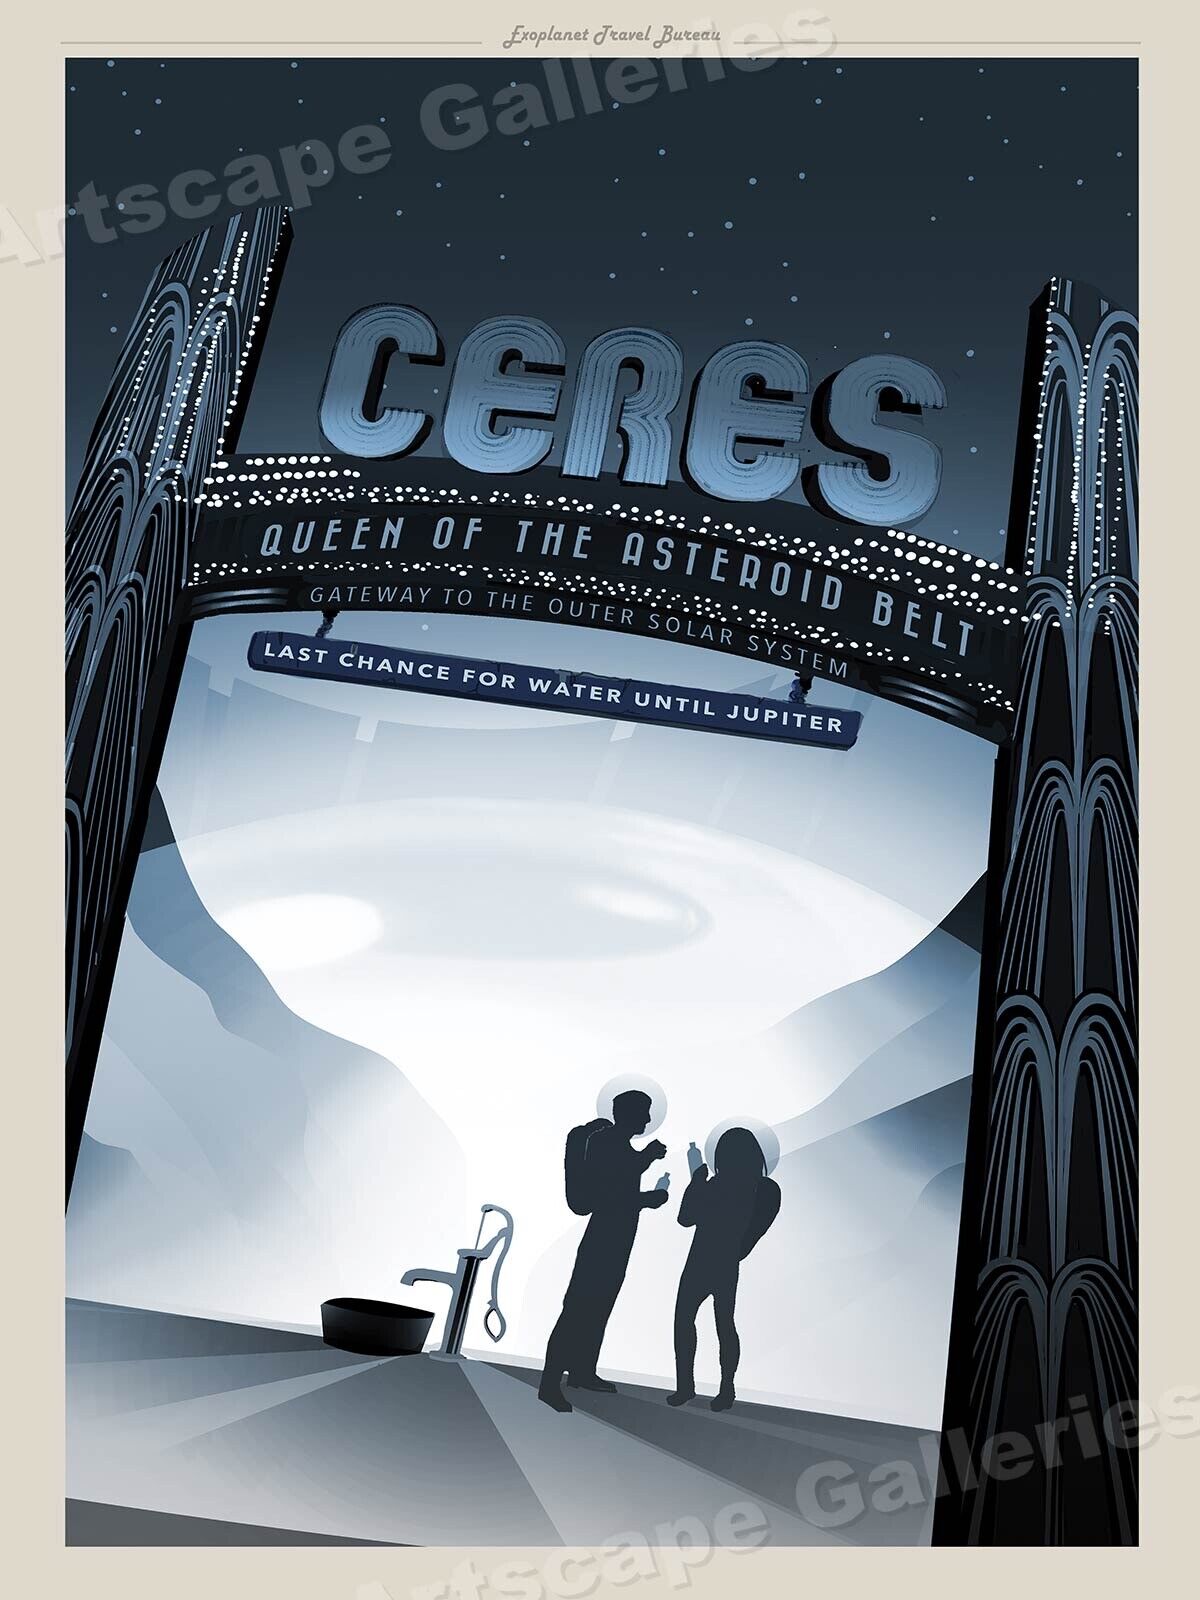 “Ceres” Space Exploration Retro Outer Space ExoPlanet Travel Poster - 18x24